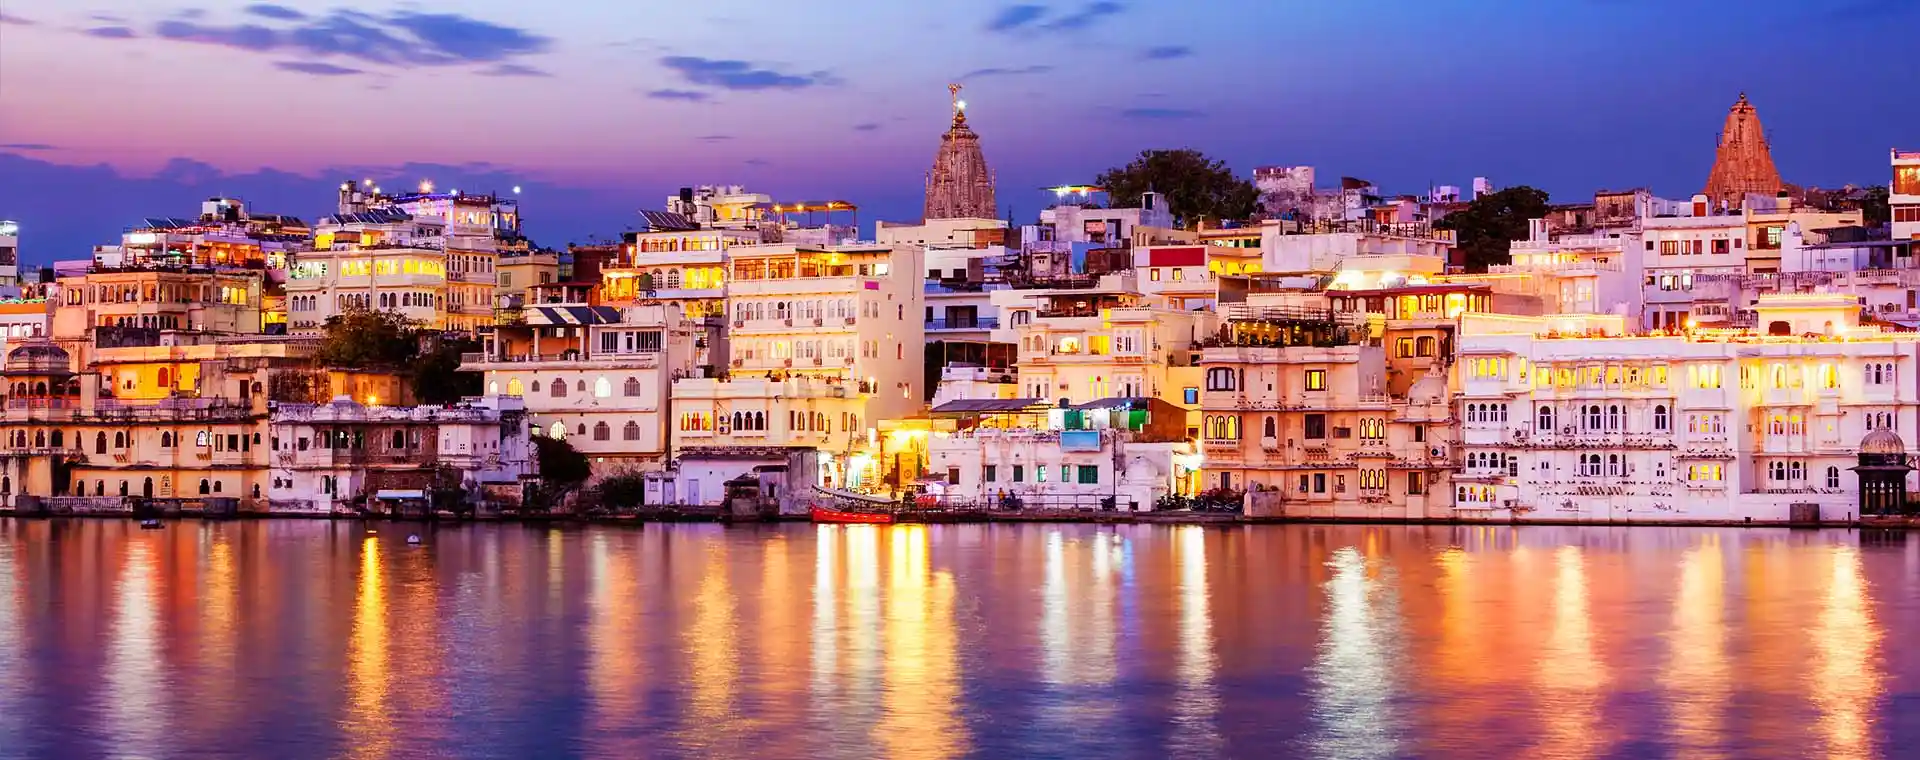 Places to Visit in Udaipur at Night